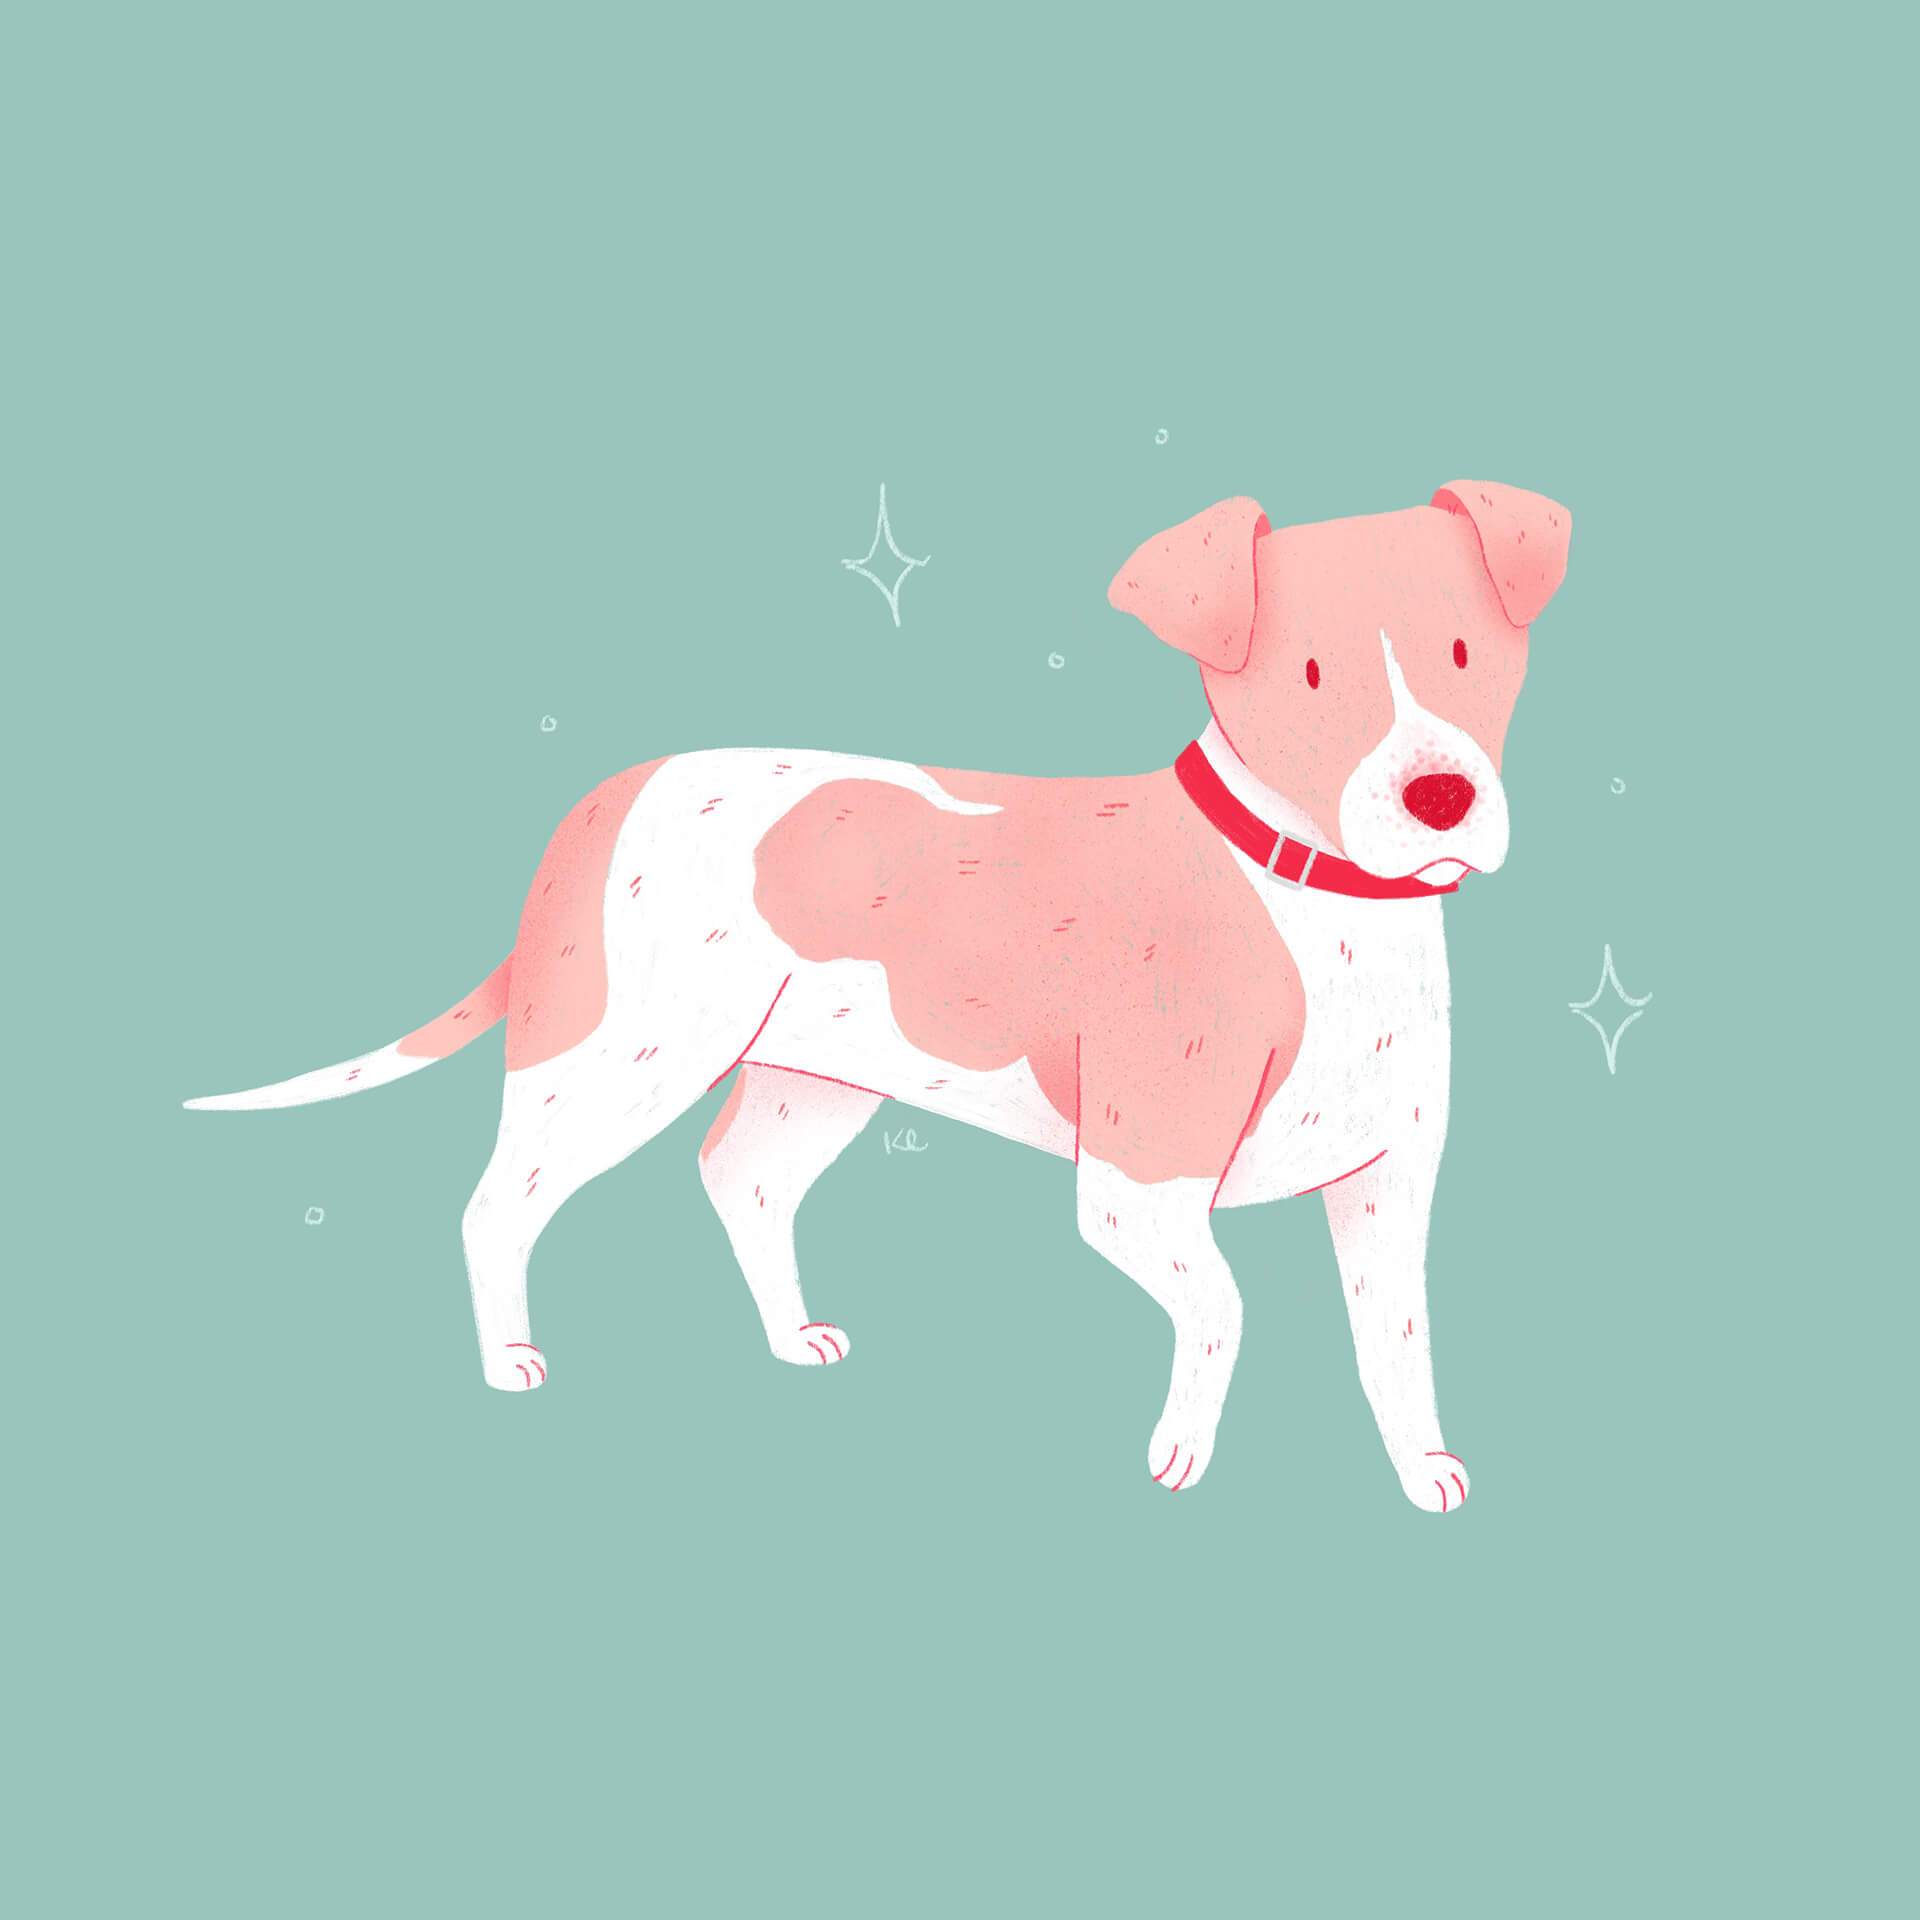 illustration of a little pink and white dog on a blue backrgound